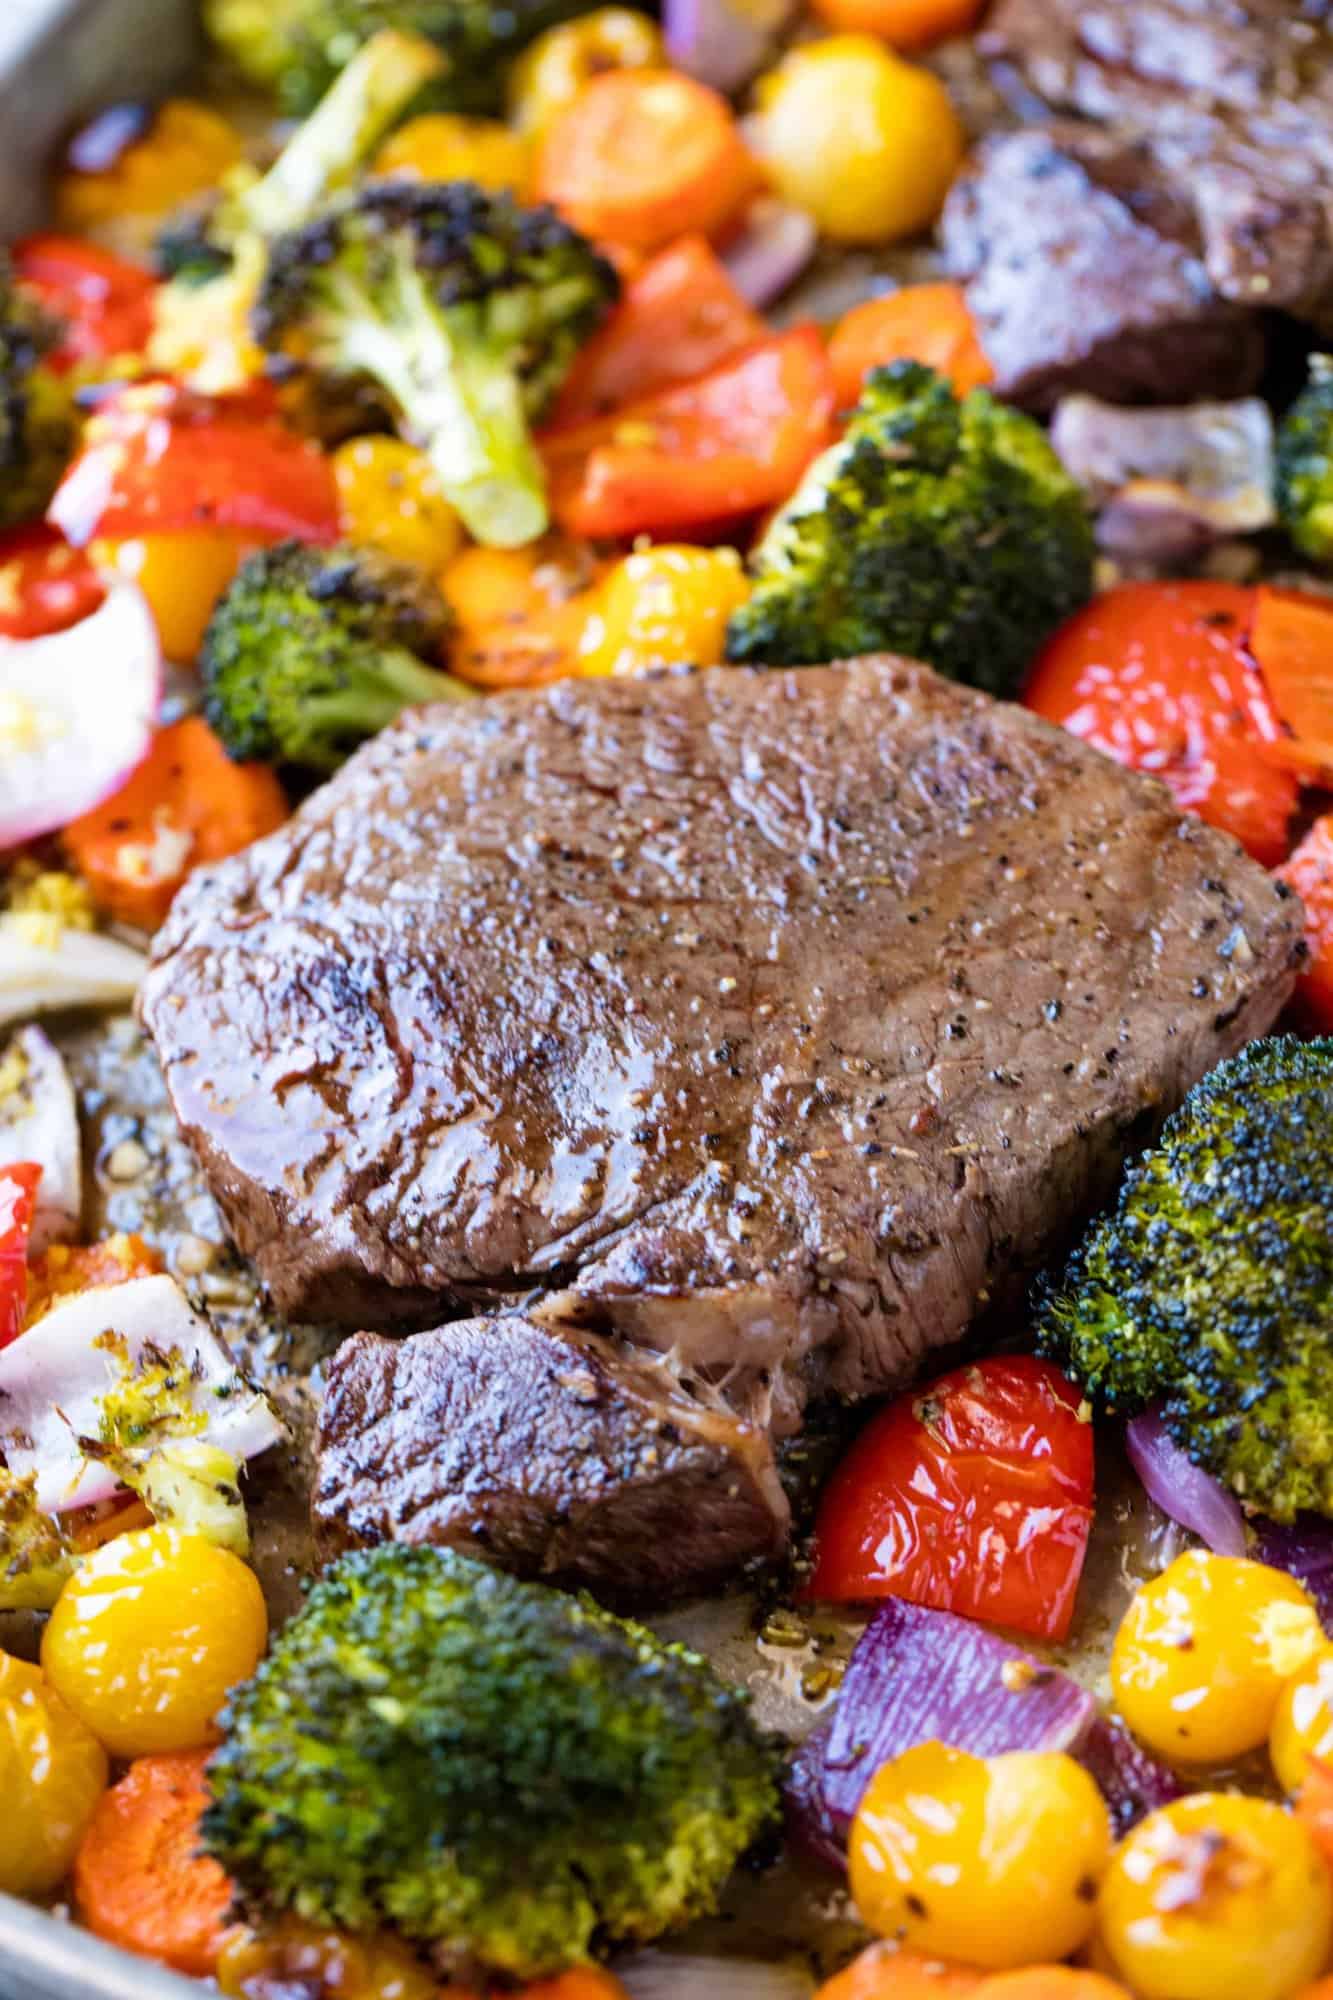 Italian Sheet Pan Steak and Veggies is a one pan meal with a colorful medley of vegetables and an Italian inspired butter sauce that keeps everything moist and flavorful.